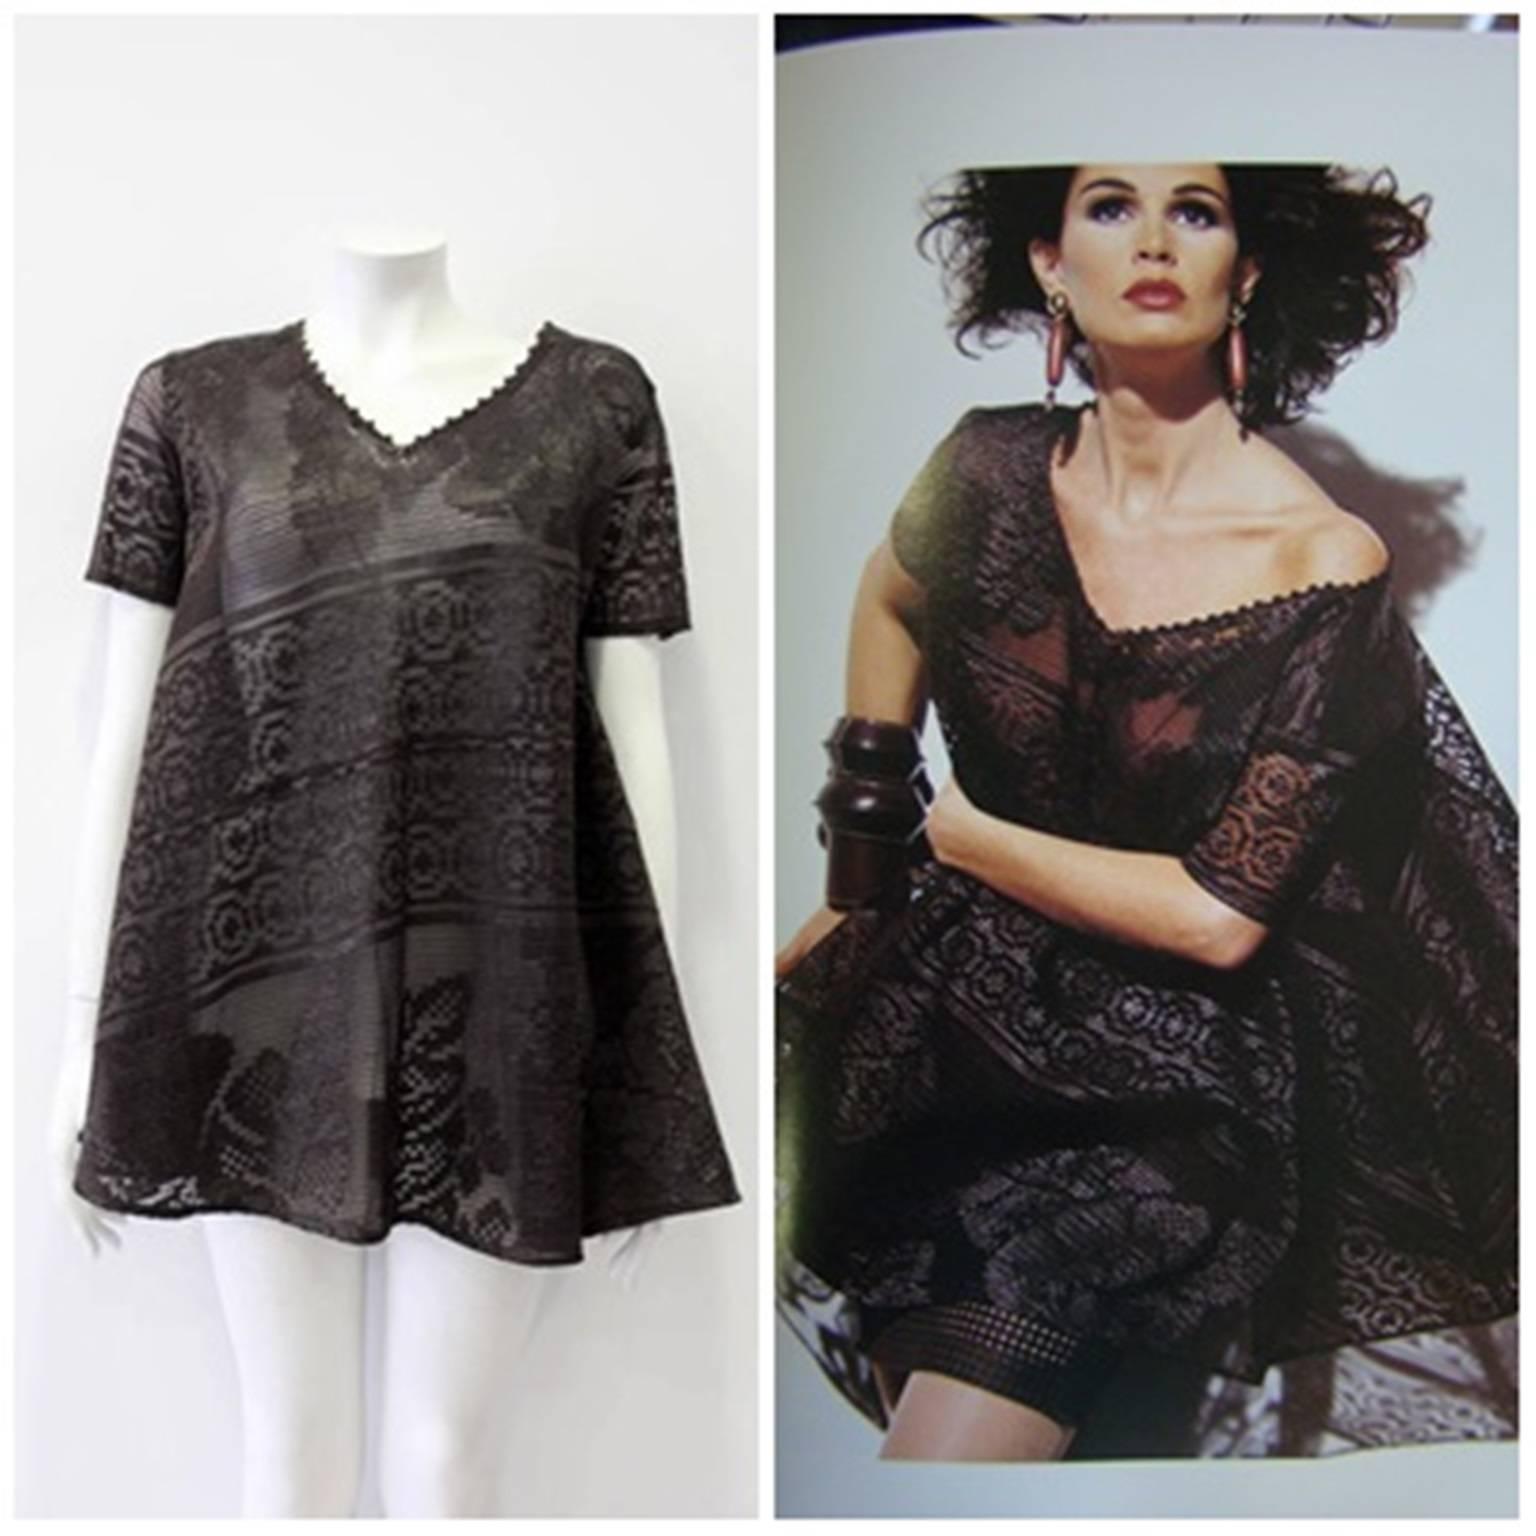 Exceptional Flared Gianfranco Ferre Chocolate Brown Lace Tunic Top For Sale 1